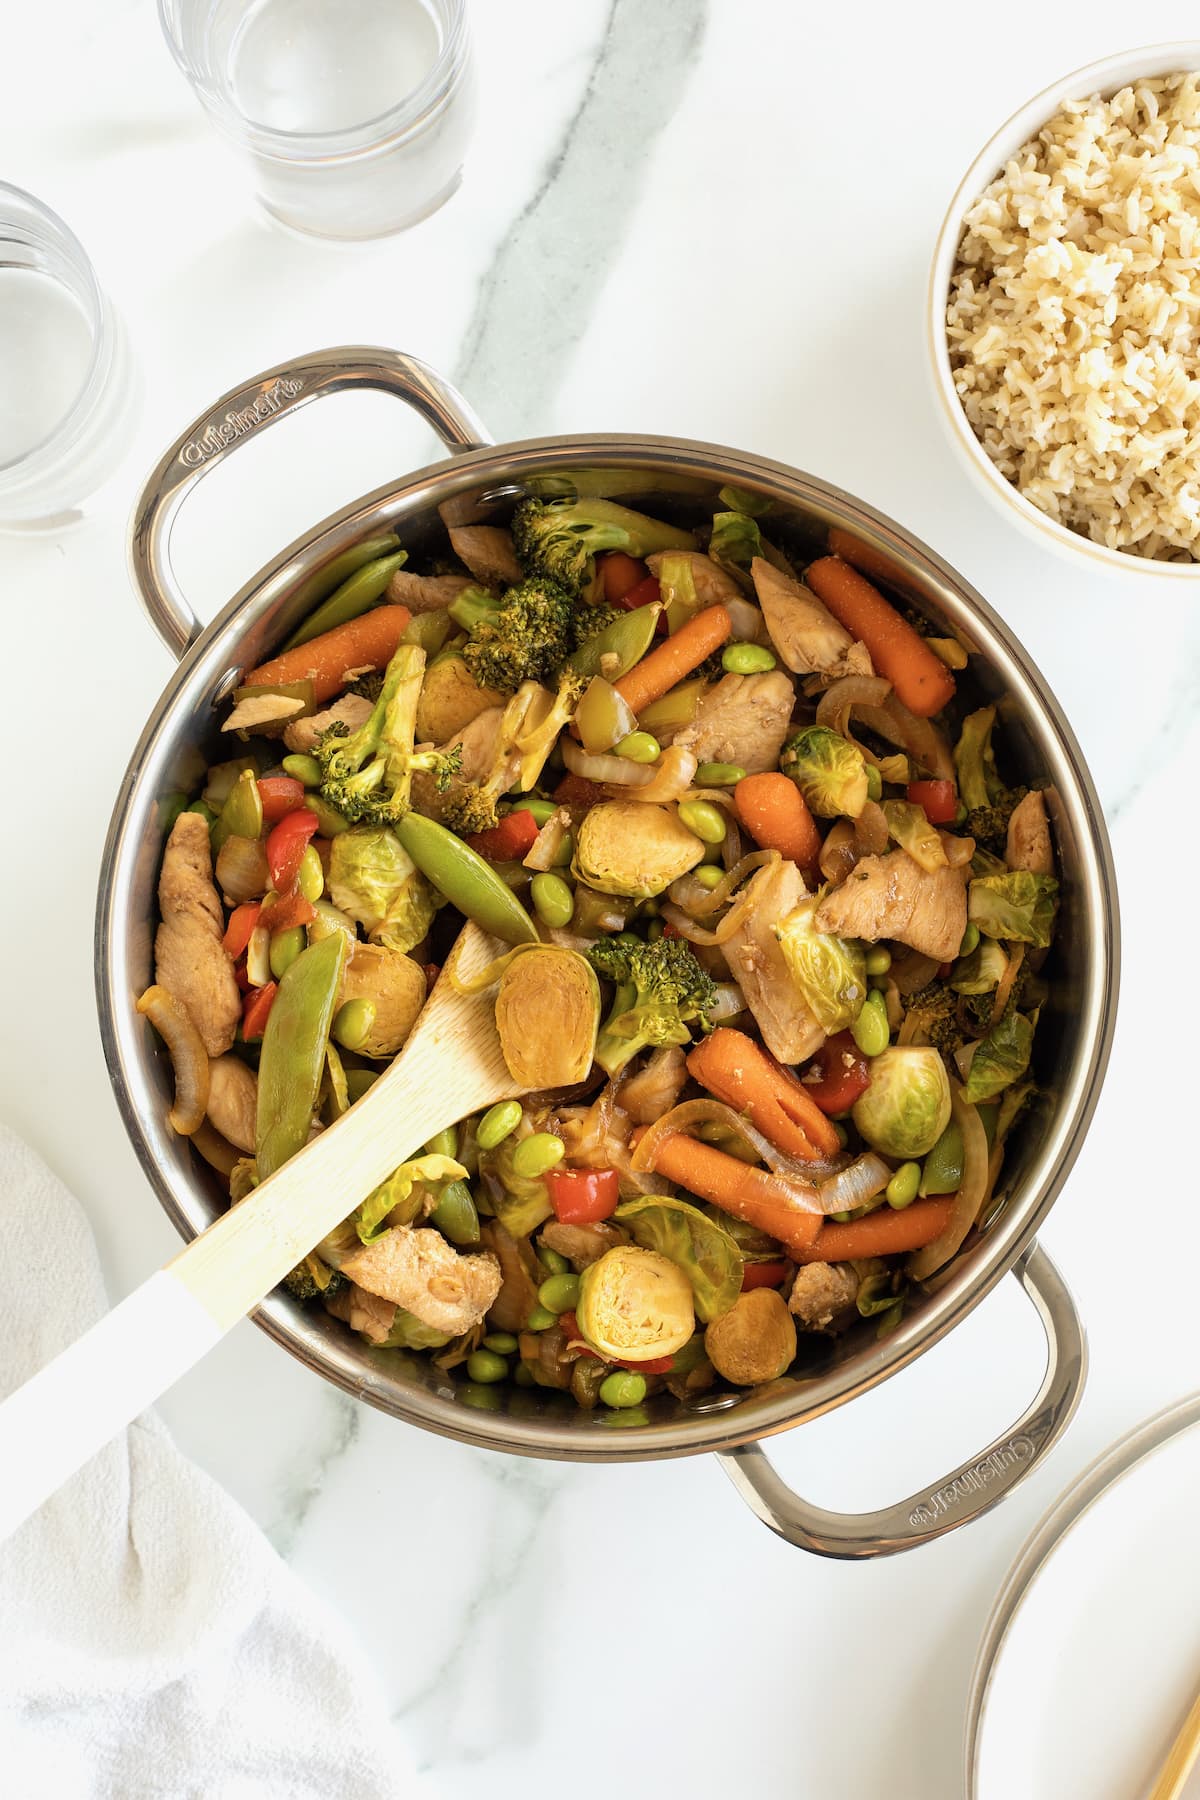 Stir fried chicken and vegetables in a pot.